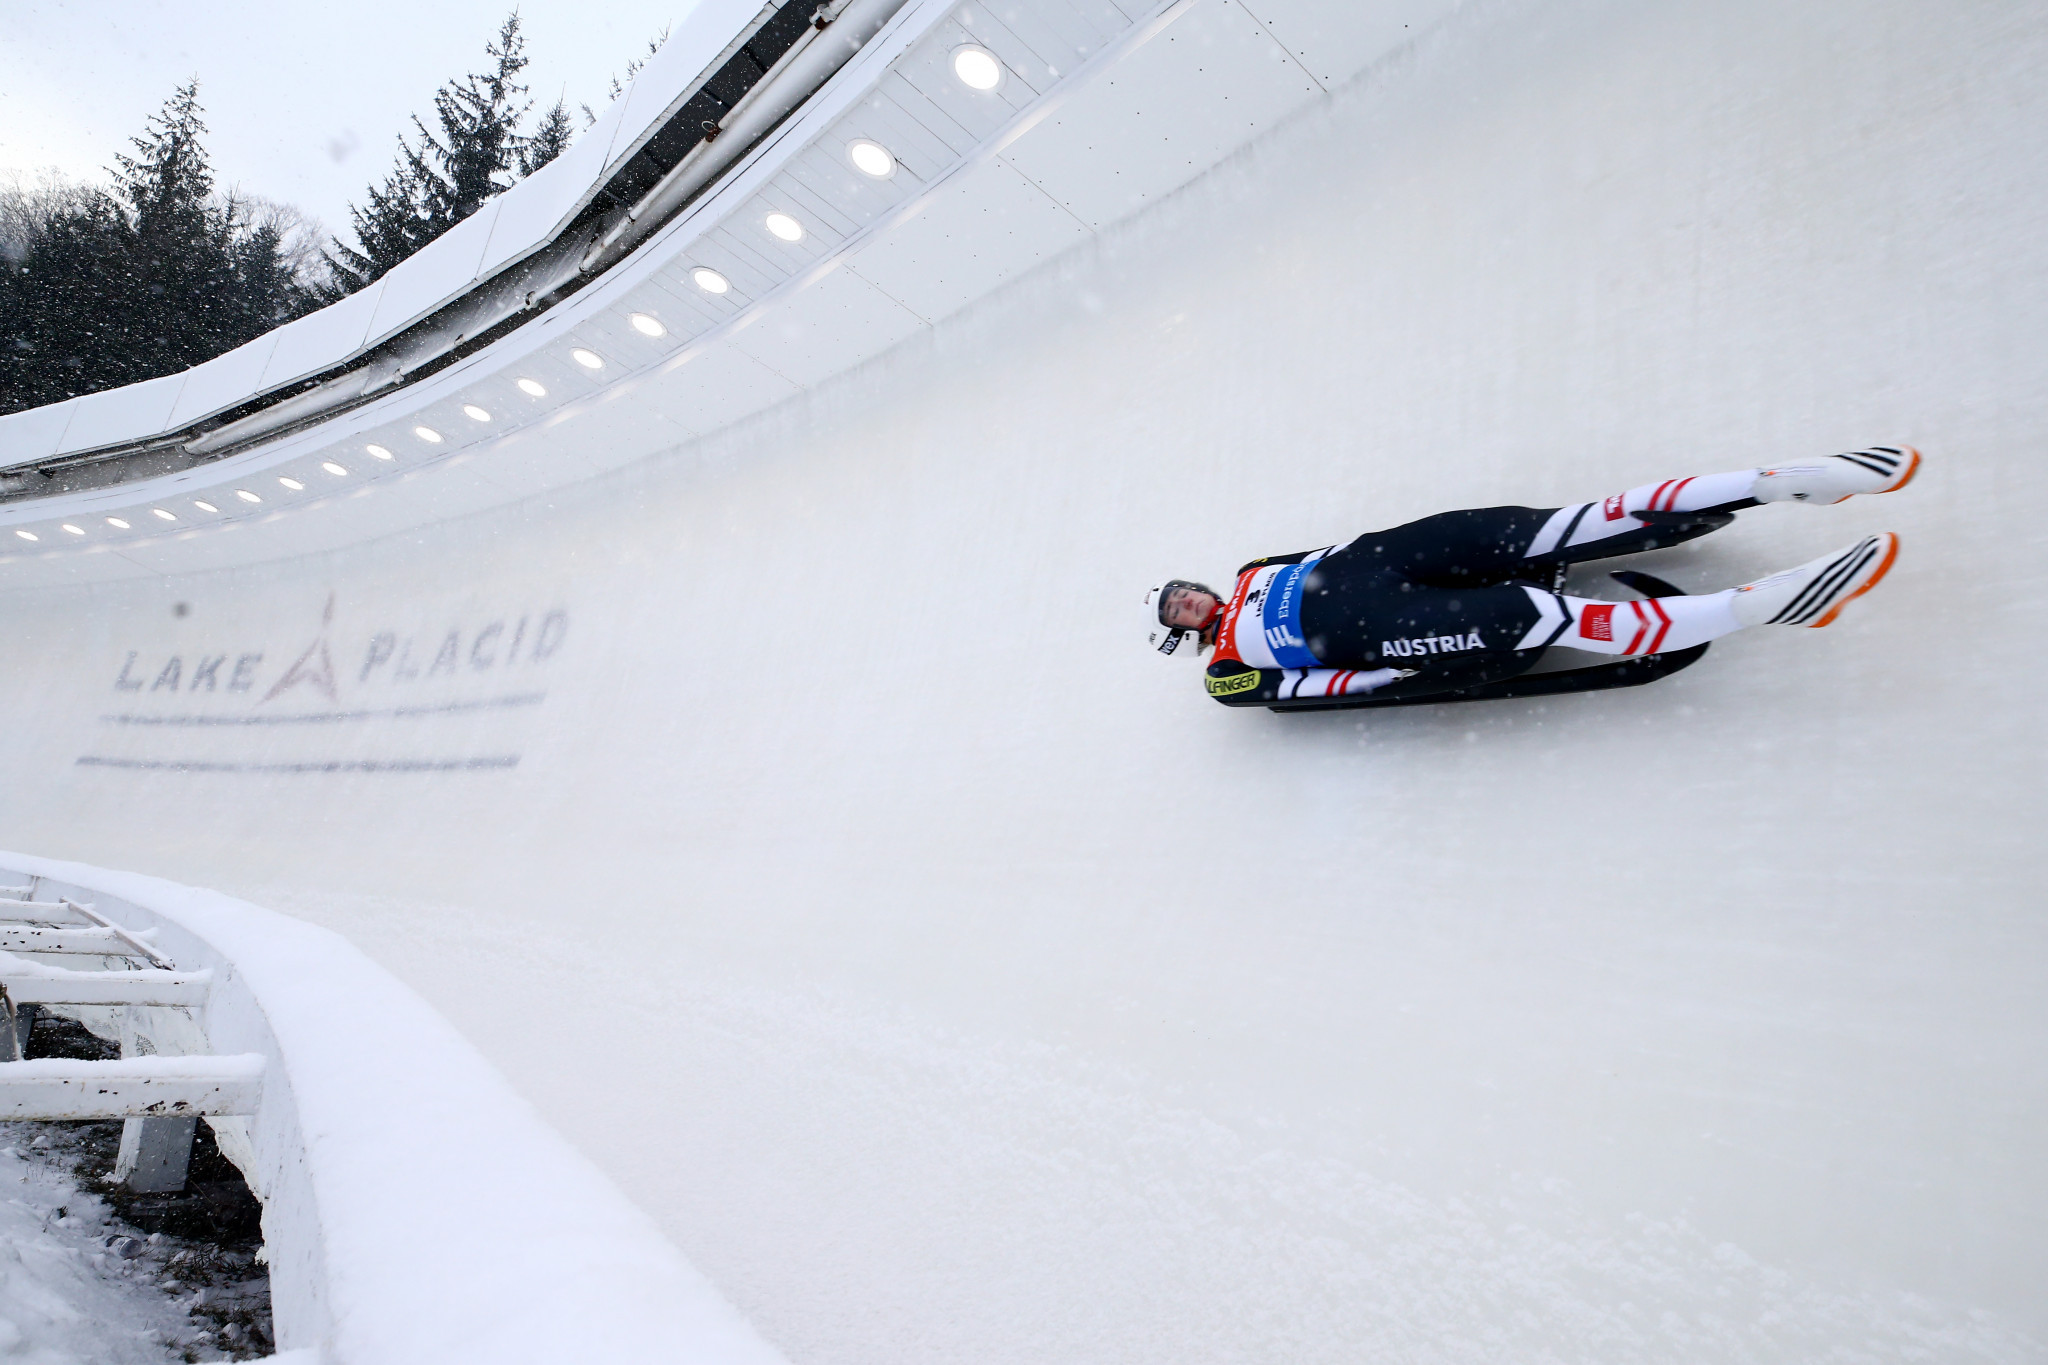 Lake Placid in the United States is set to host an event during next season's Luge World Cup ©Getty Images  